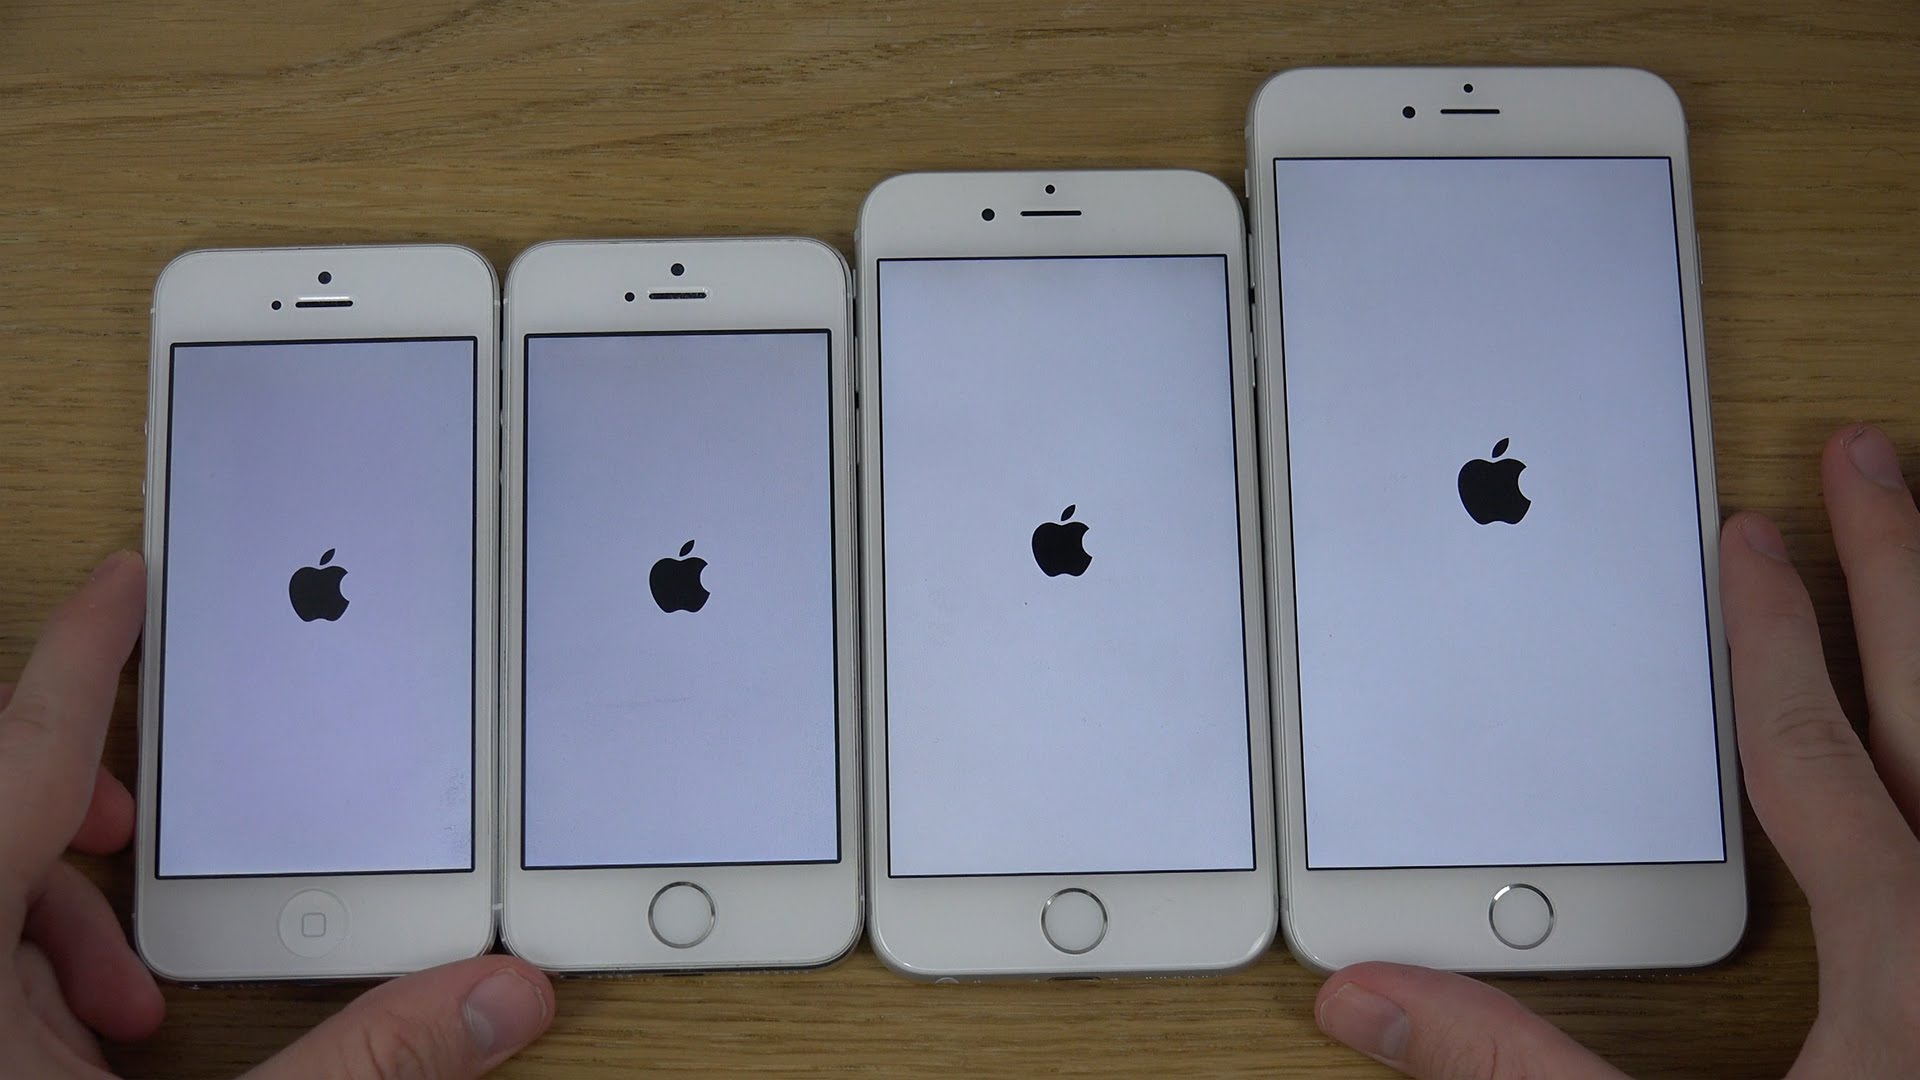 Iphone 6 Plus Vs Iphone 6 Vs Iphone 5s Vs Iphone 5 Which Is